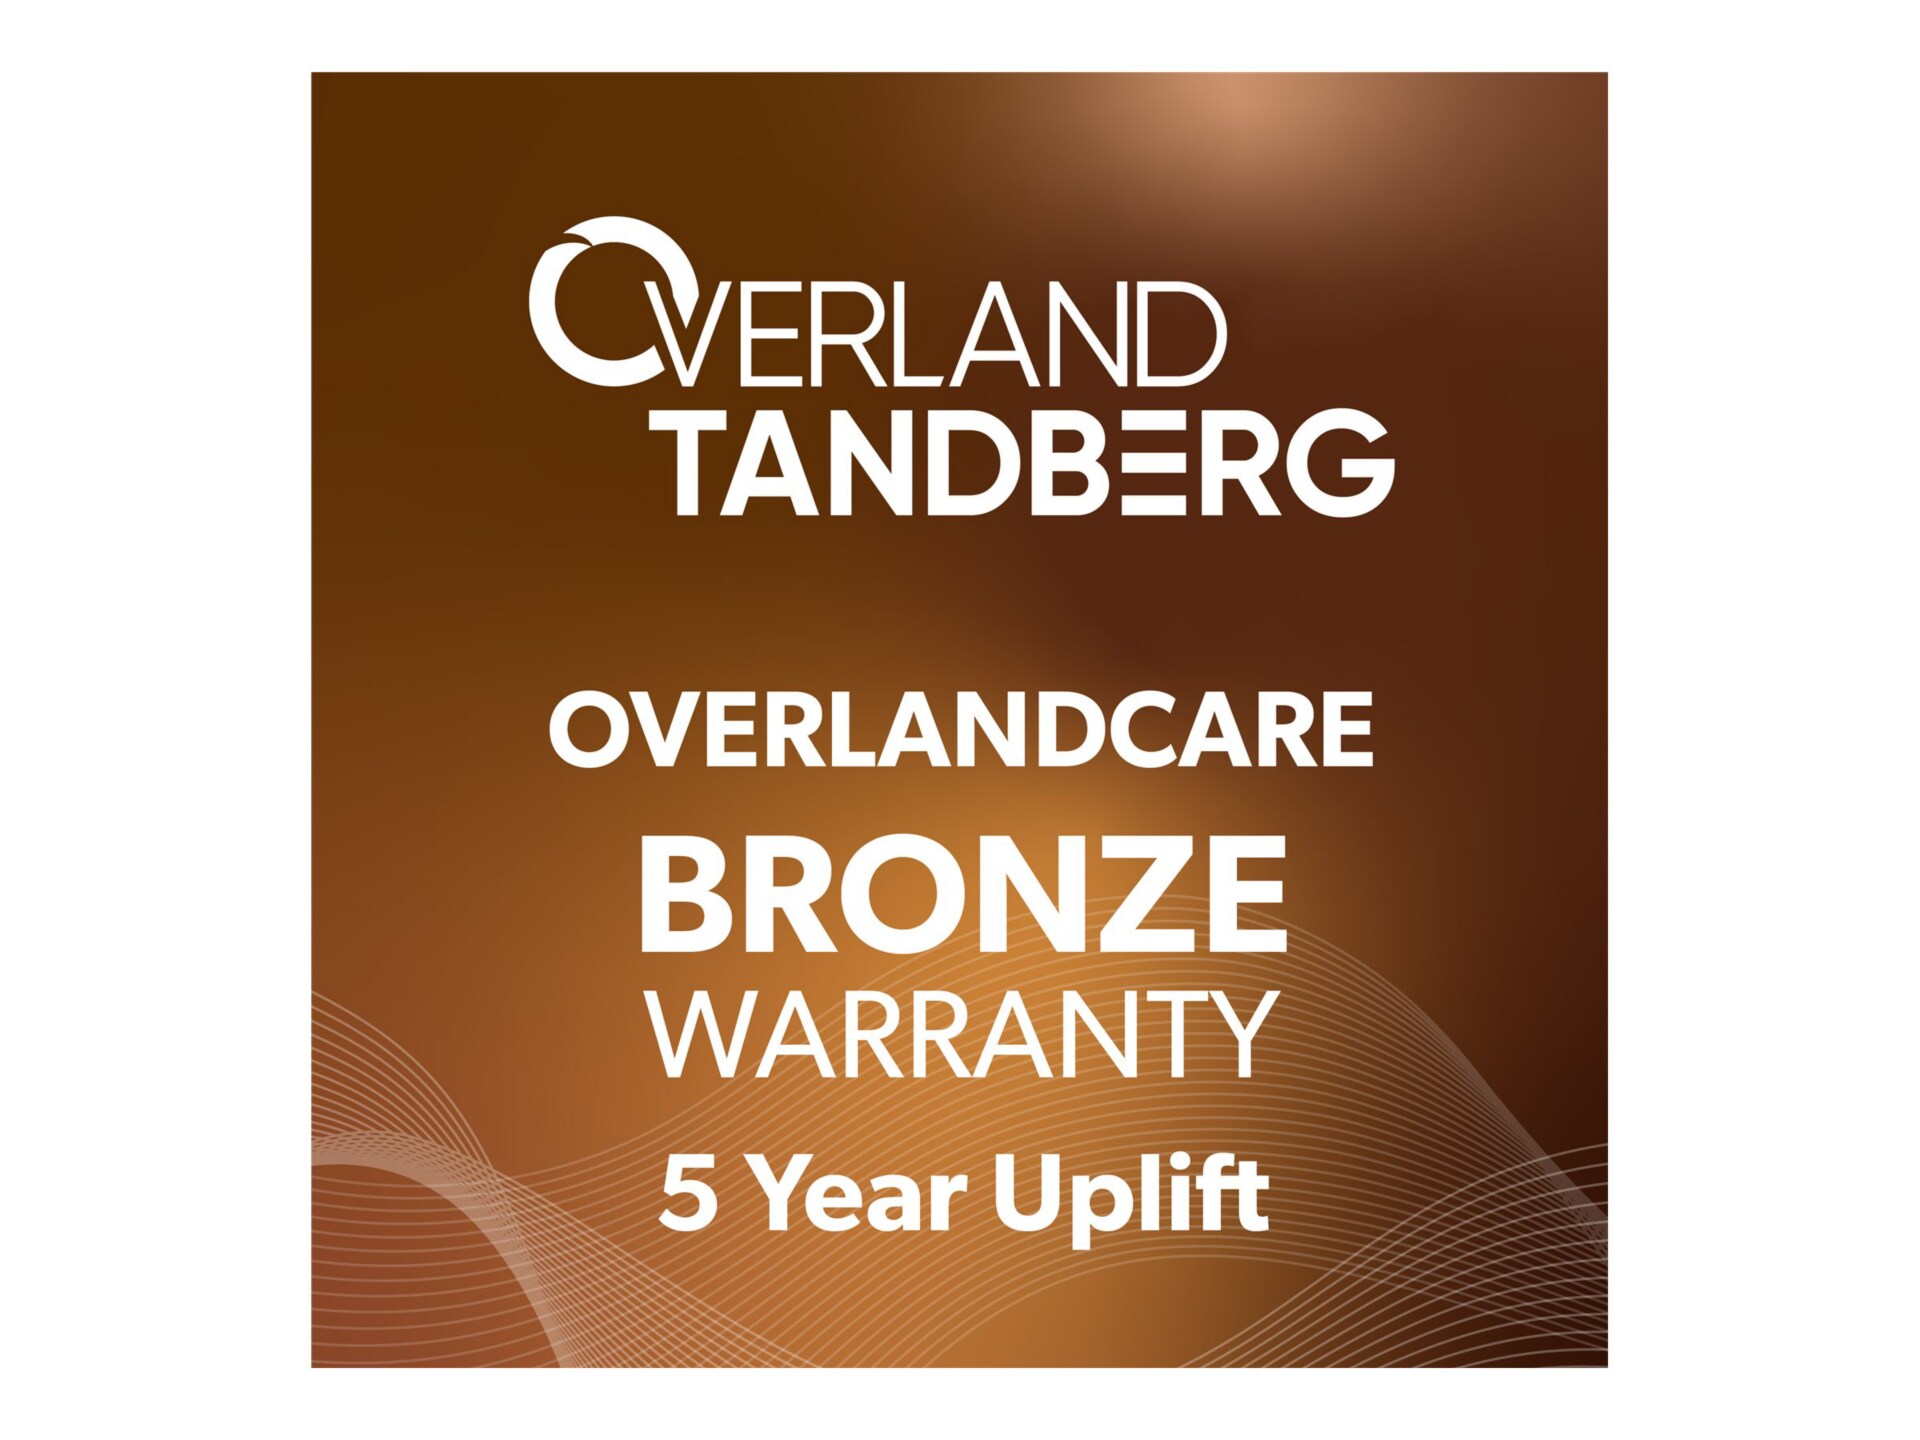 OverlandCare Bronze - extended service agreement (uplift) - 5 years - shipment